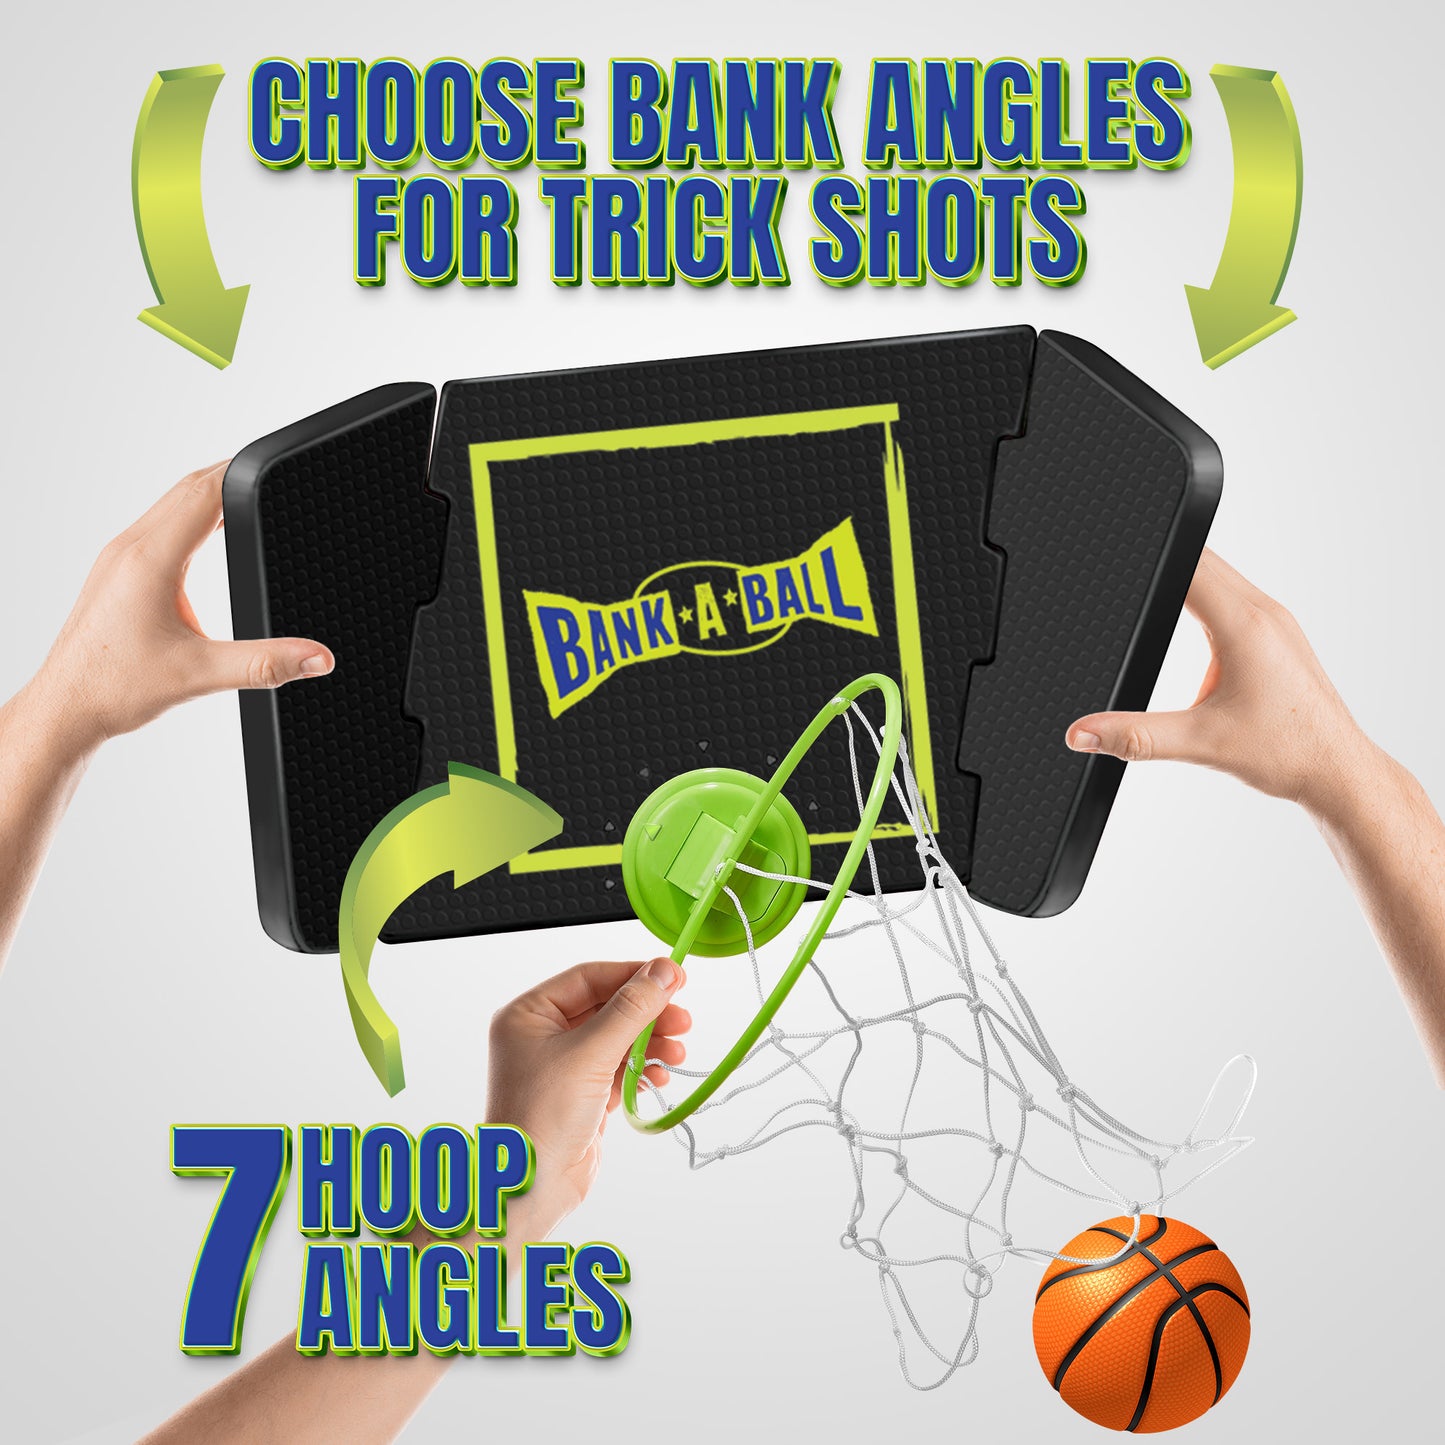 Bank-A-Ball Mini Basketball Hoop for Adults or Kids - Indoor Portable Adjustable Playing Set w/Ball - Over The Door Hoop with Adjustable Backboard & Rim for Endless Trickshot Creative Fun